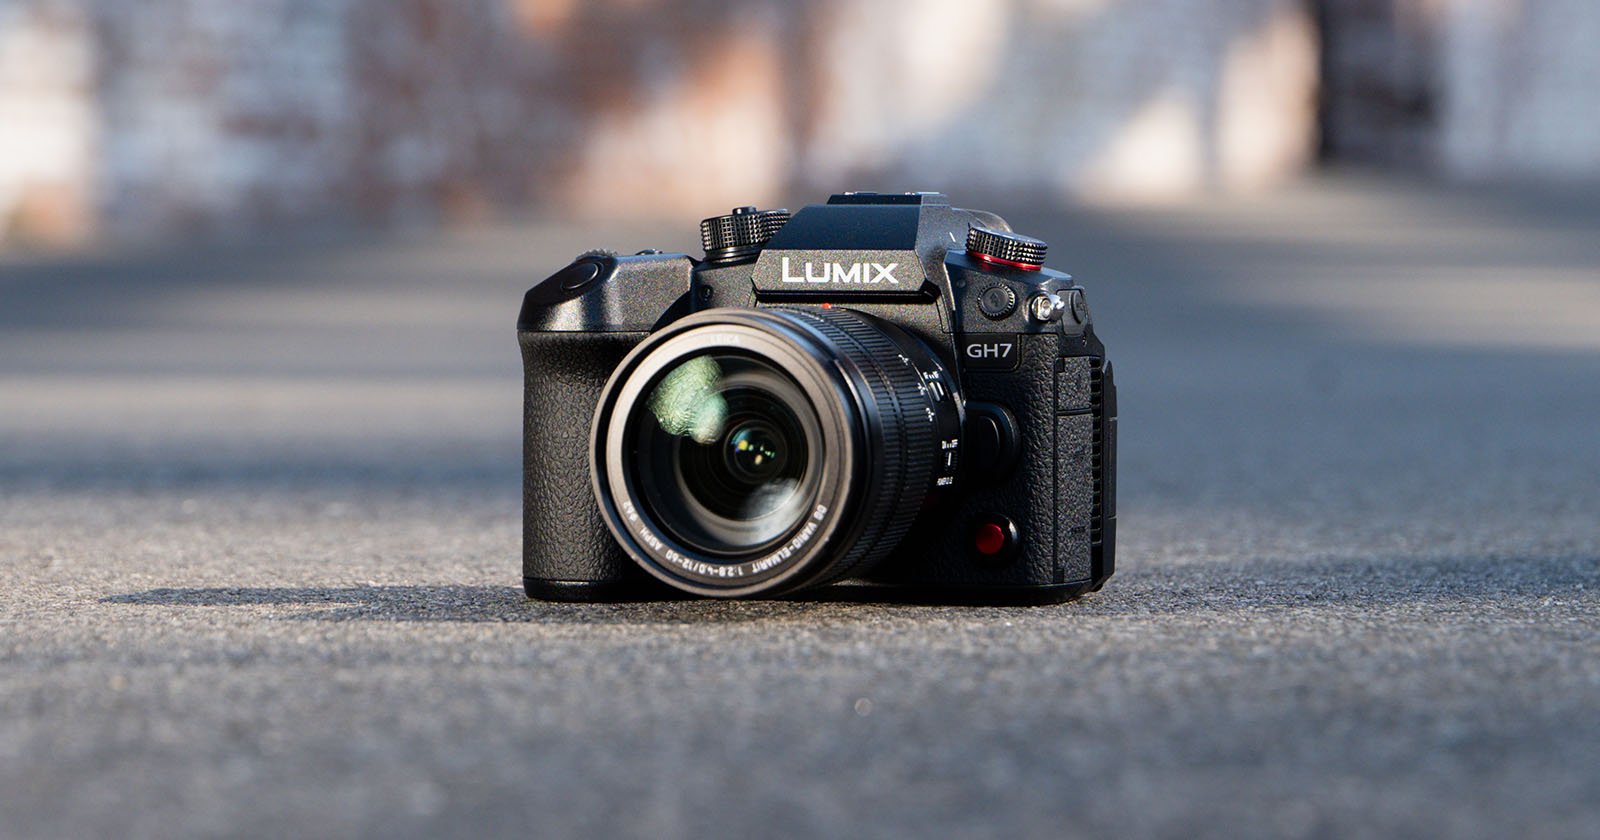 A Lumix GH7 camera is placed on a smooth gray surface. The camera lens is prominently visible, pointing towards the viewer, with the Lumix logo on the top. The background is blurred, highlighting the focus on the camera.